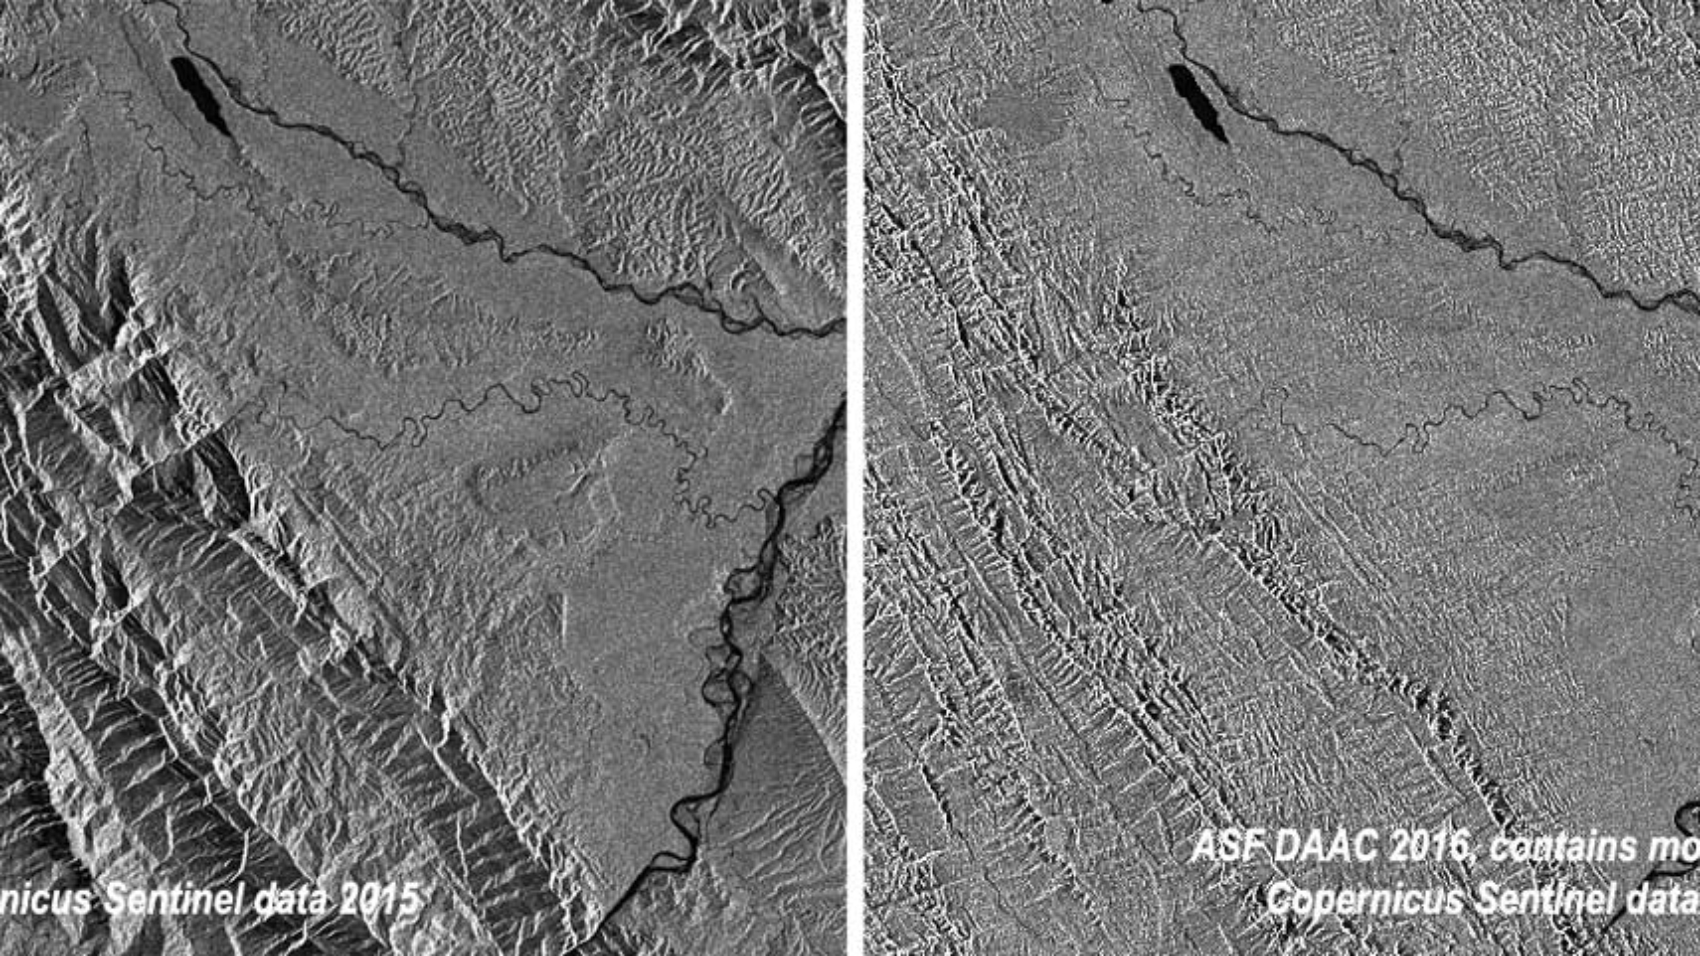 Before and after RTC: In this detail from the test granule below, mountains in Bolivia (left) appear stretched on one side and compressed on the other. RTC (right) moves pixels to unstretch the mountains and adjusts pixel values to subtract the effect of slopes on brightness. Credit left: Copernicus Sentinel data 2015. Credit right: ASF DAAC 2016, contains modified Copernicus Sentinel data 2015, processed by ESA.